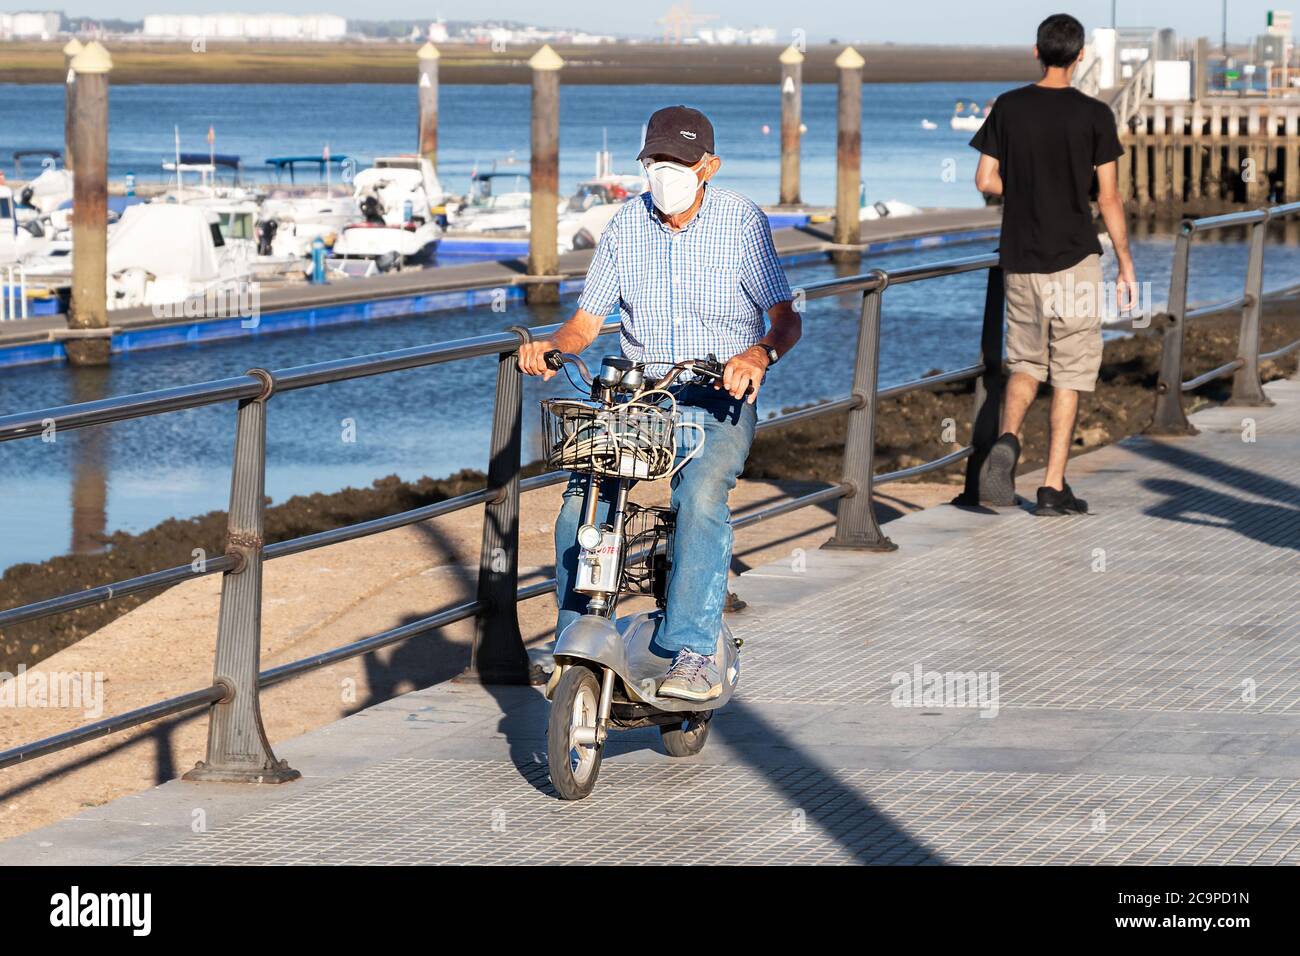 Punta Umbria, Huelva, Spain - July 10, 2020: A elderly man riding an electric scooter by the sidewalk wearing a protective mask. Stock Photo